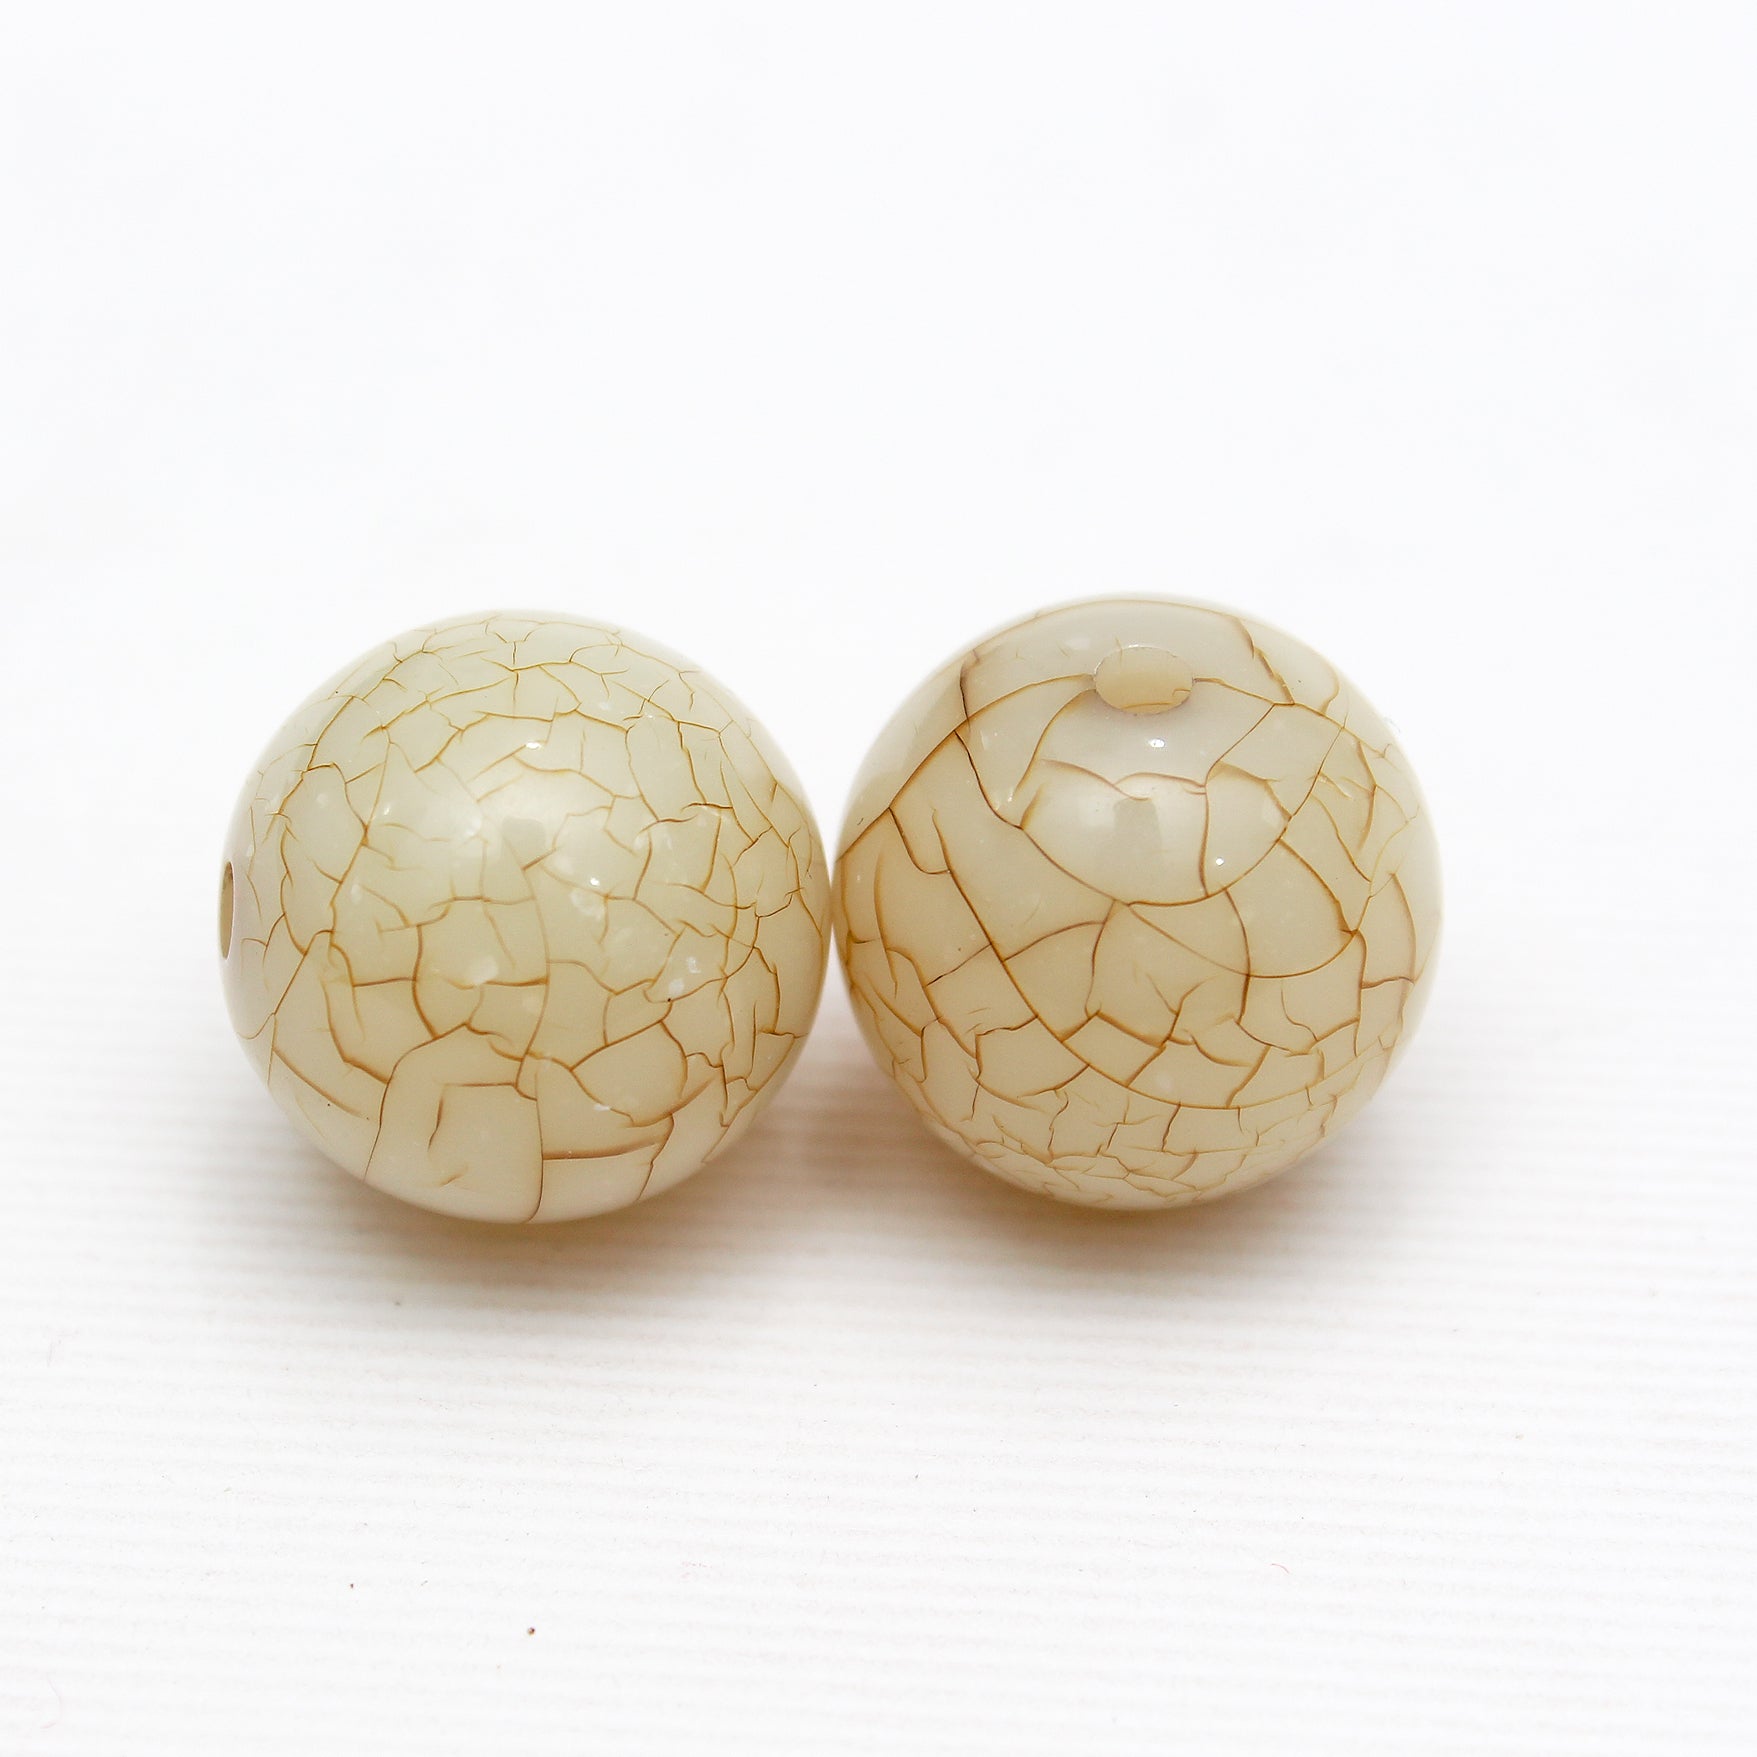 Beads Pearly Crackled Round 15Mm X 15Mm 30G Pb Ib